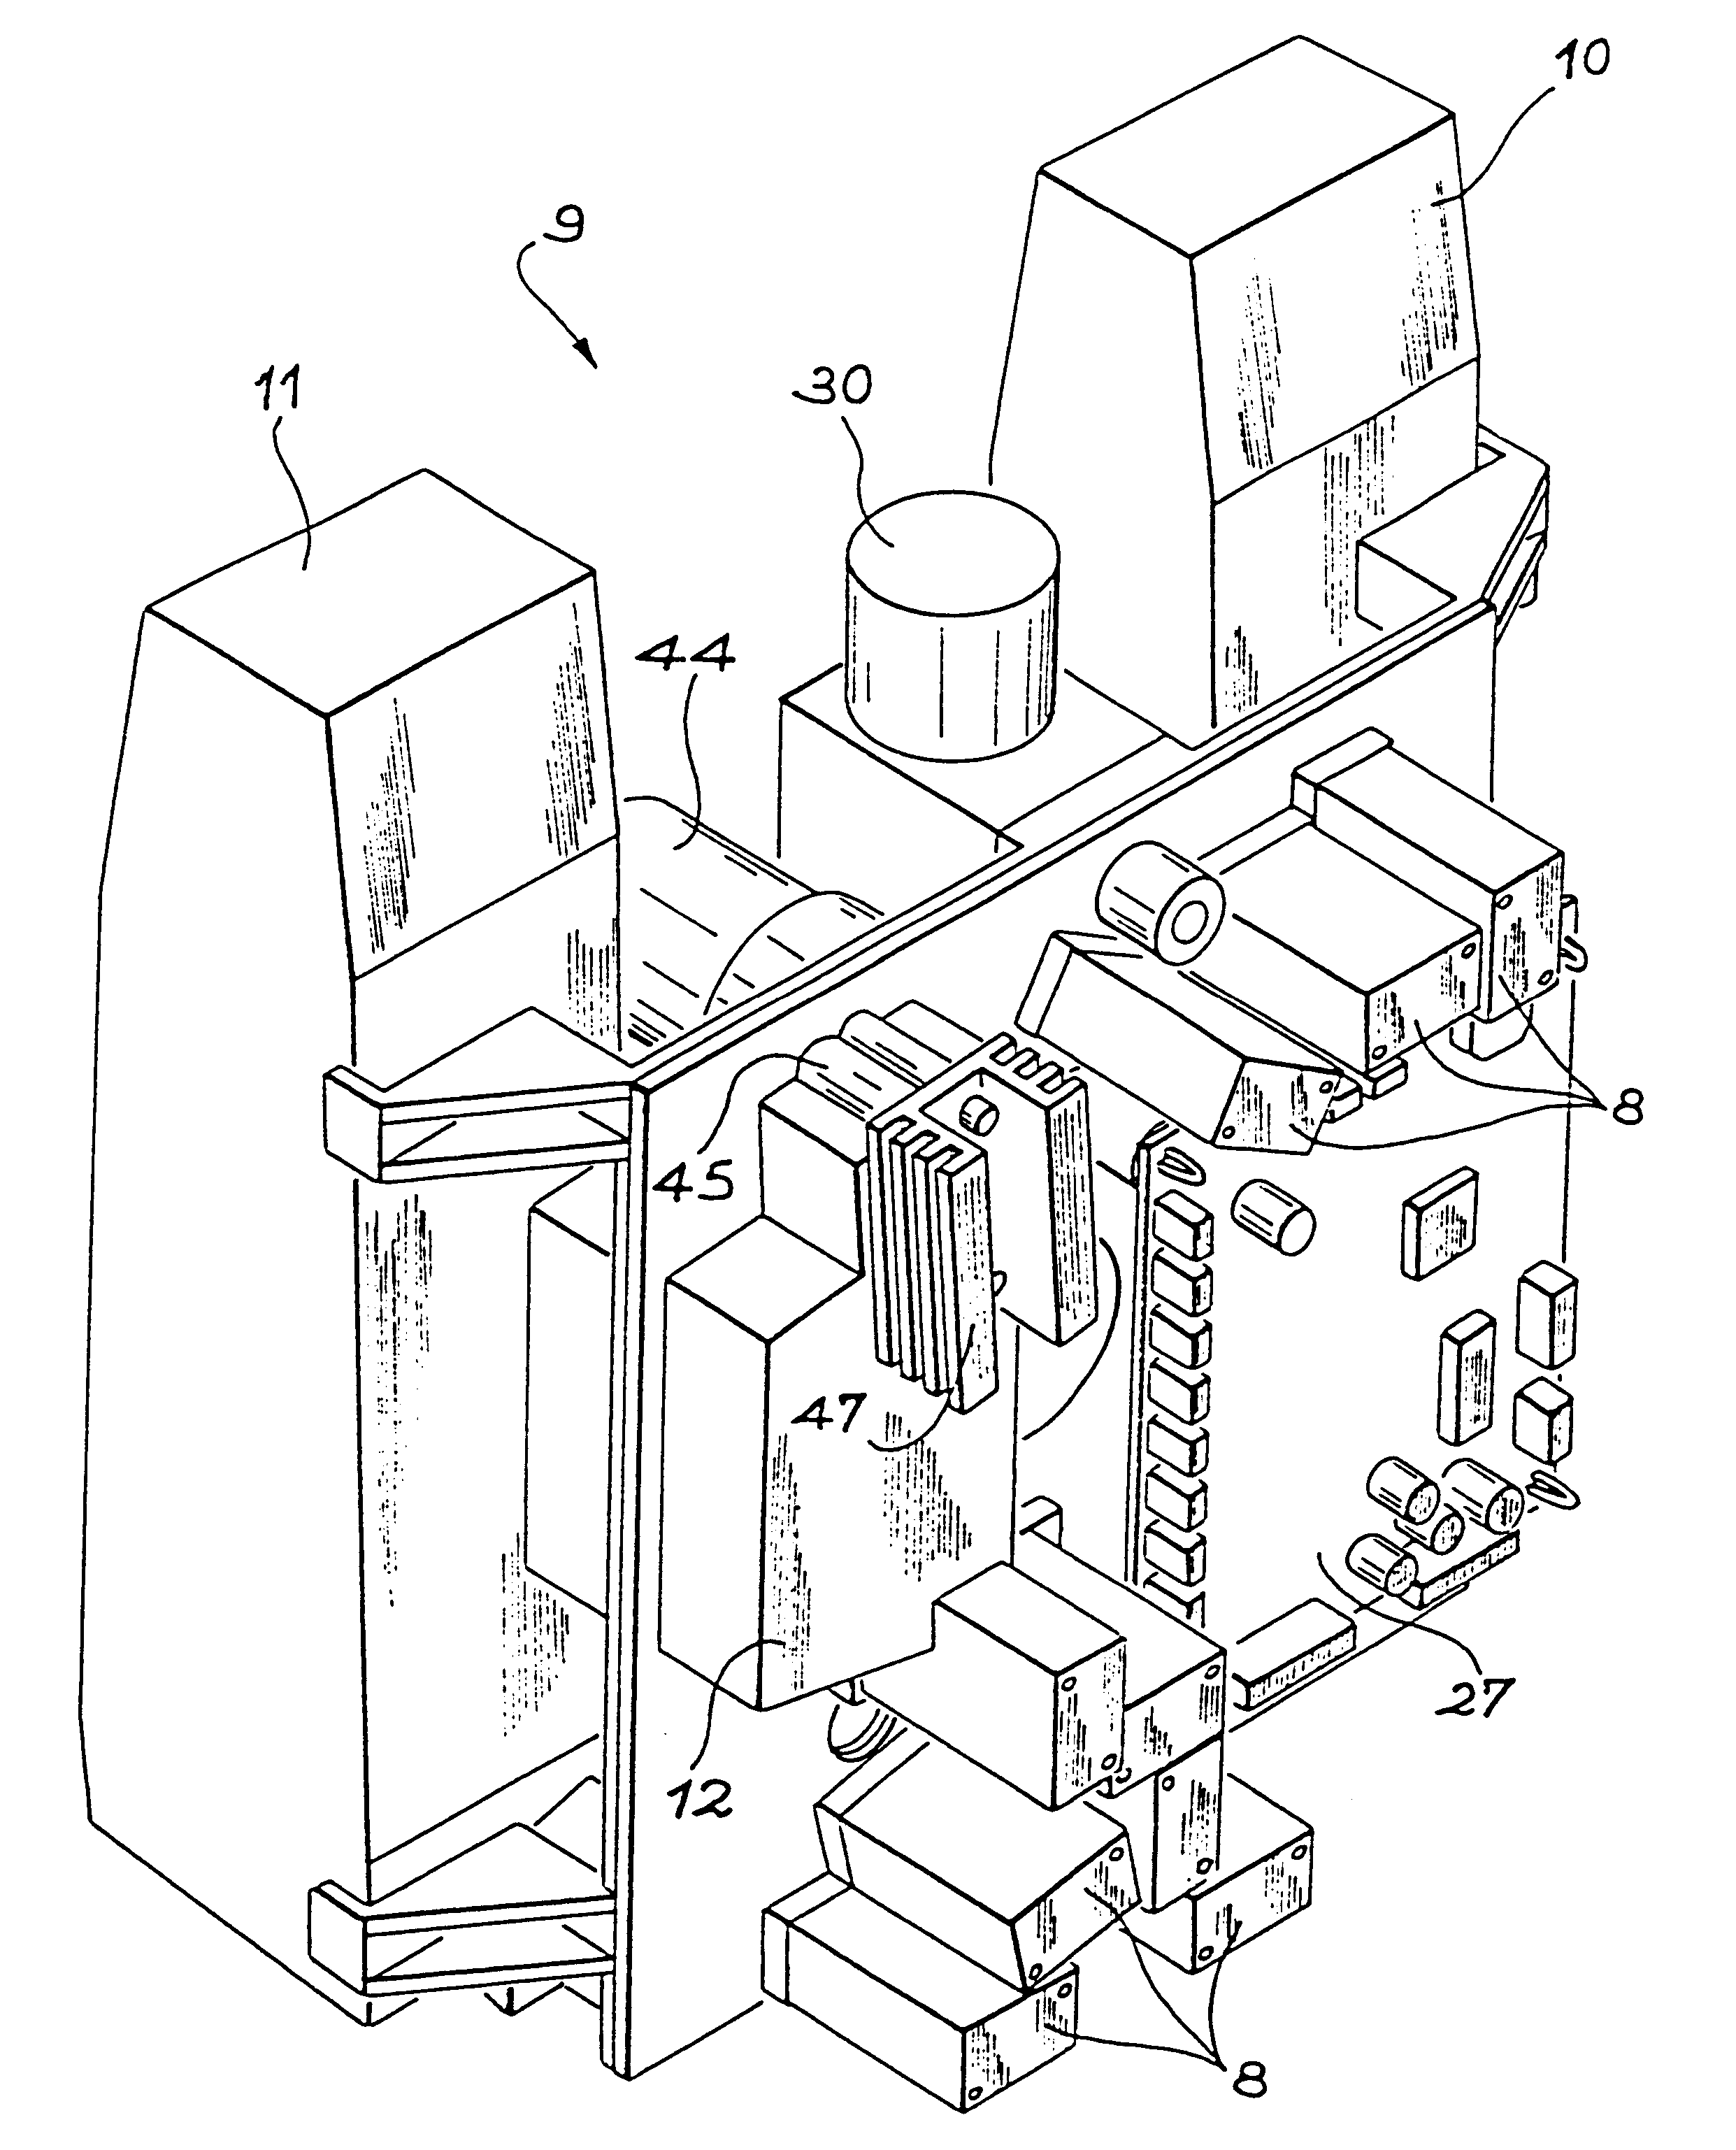 Ink jet printing device and circuit